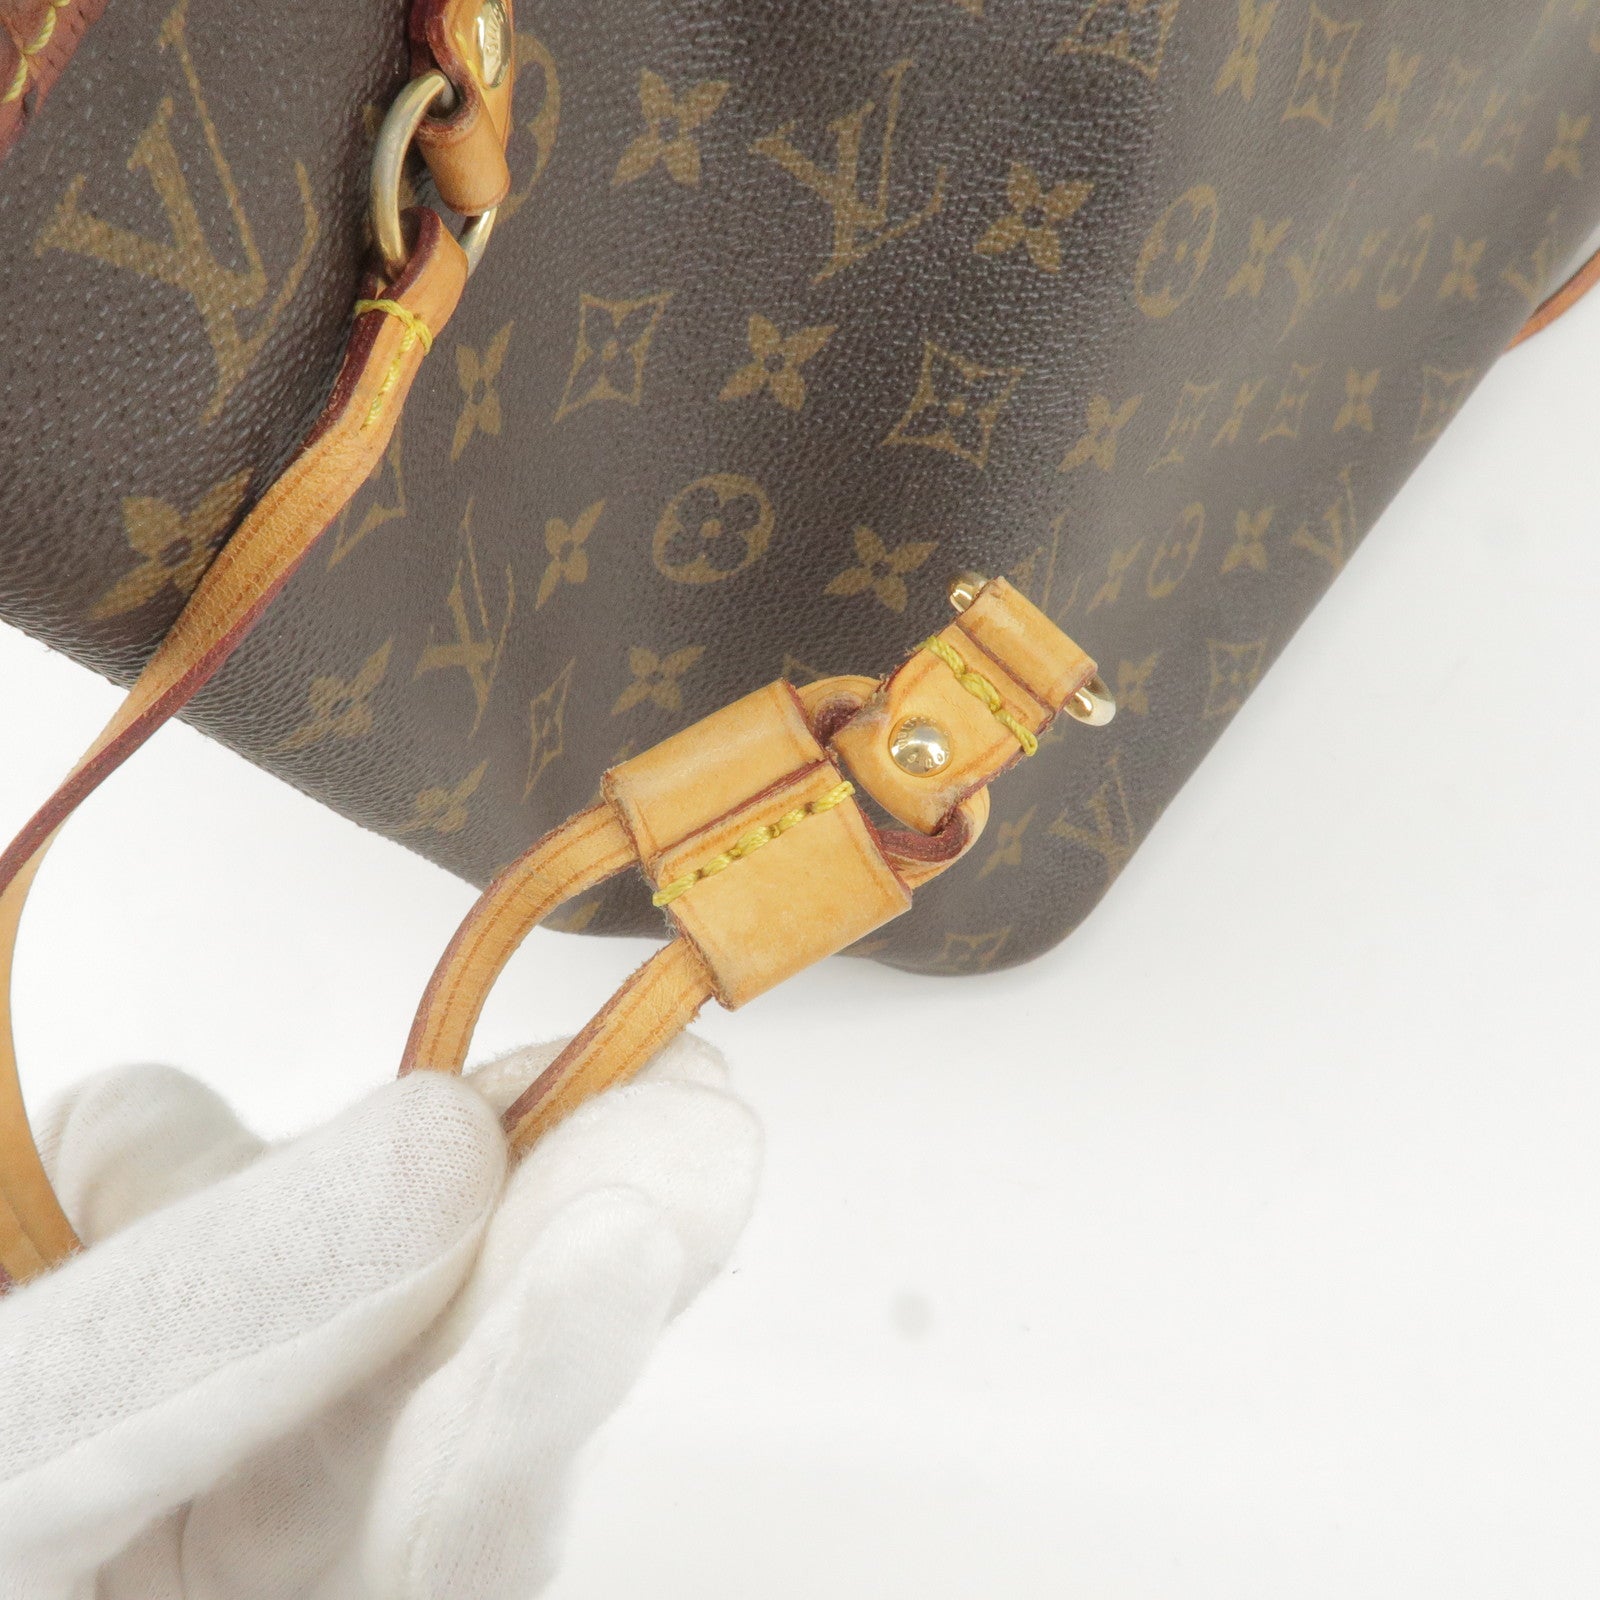 Louis Vuitton Neverfull Pm Beige Canvas Tote Bag (Pre-Owned)